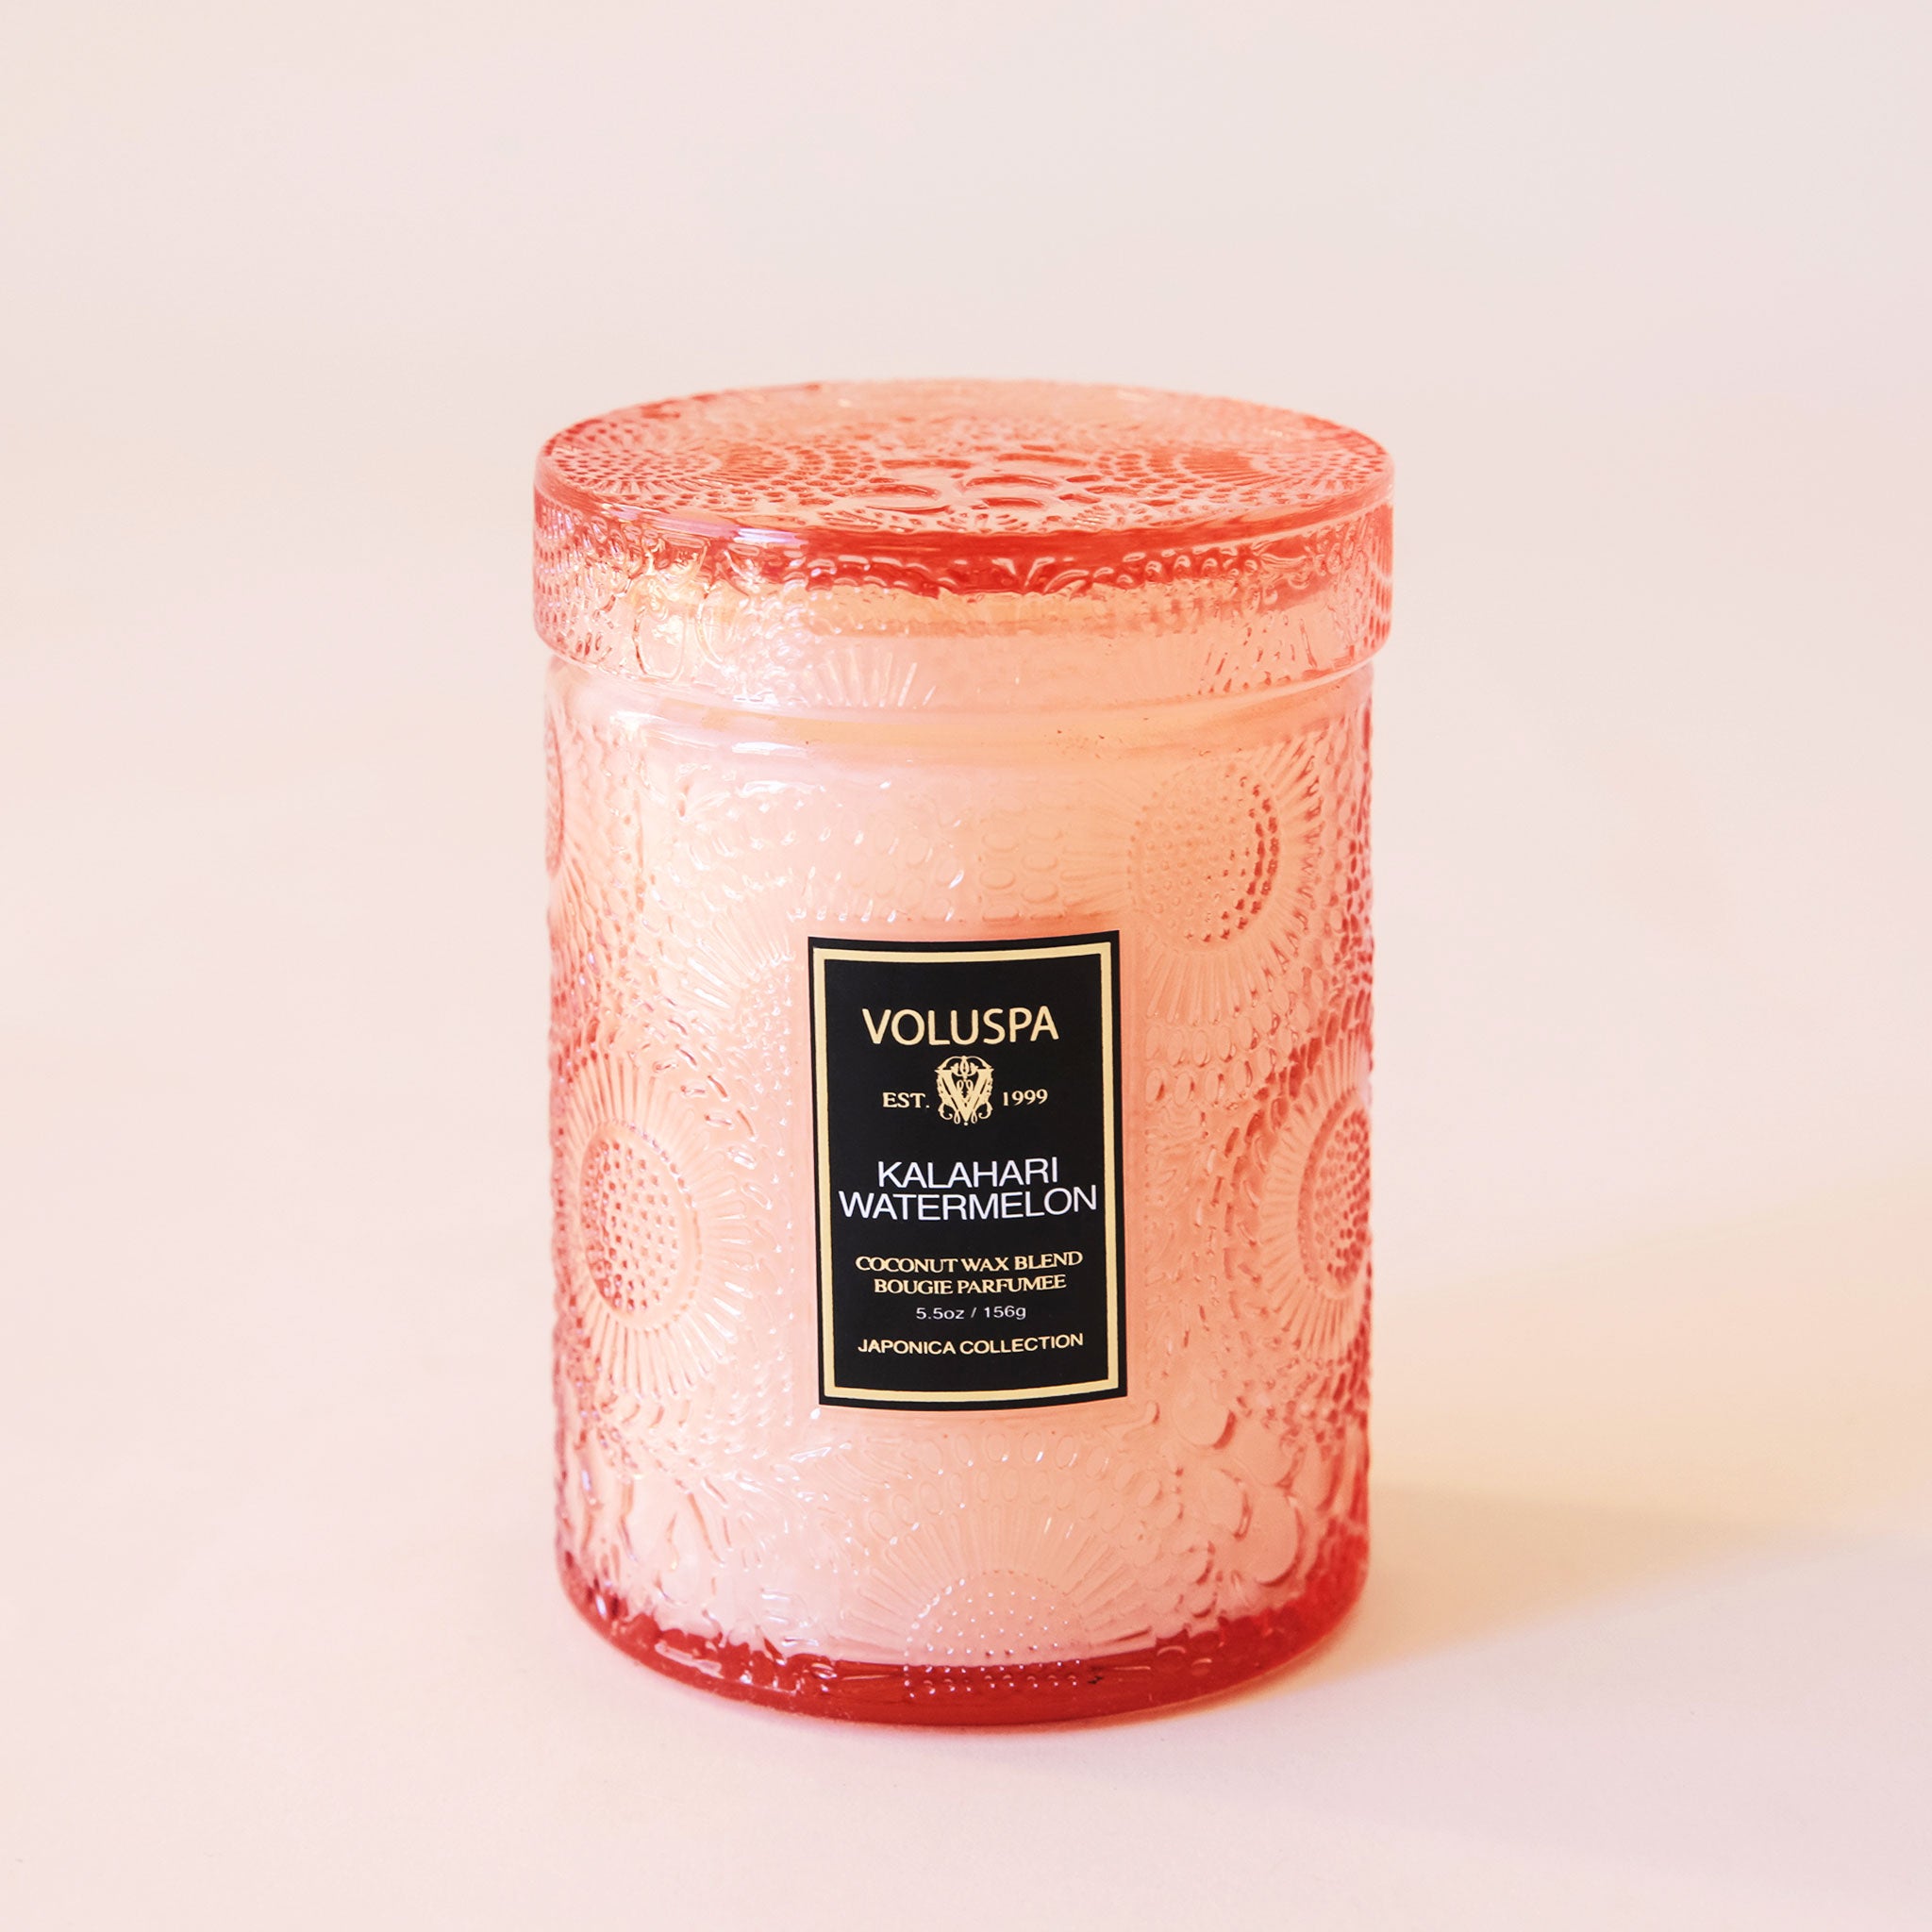 A peach colored embossed jar with an abstract floral and spotted design. The glass is somewhat clear, but is thick in quality making it slightly opaque. Its lid is also glass and has the same embossing design. The voluspa label is black with gold lettering.